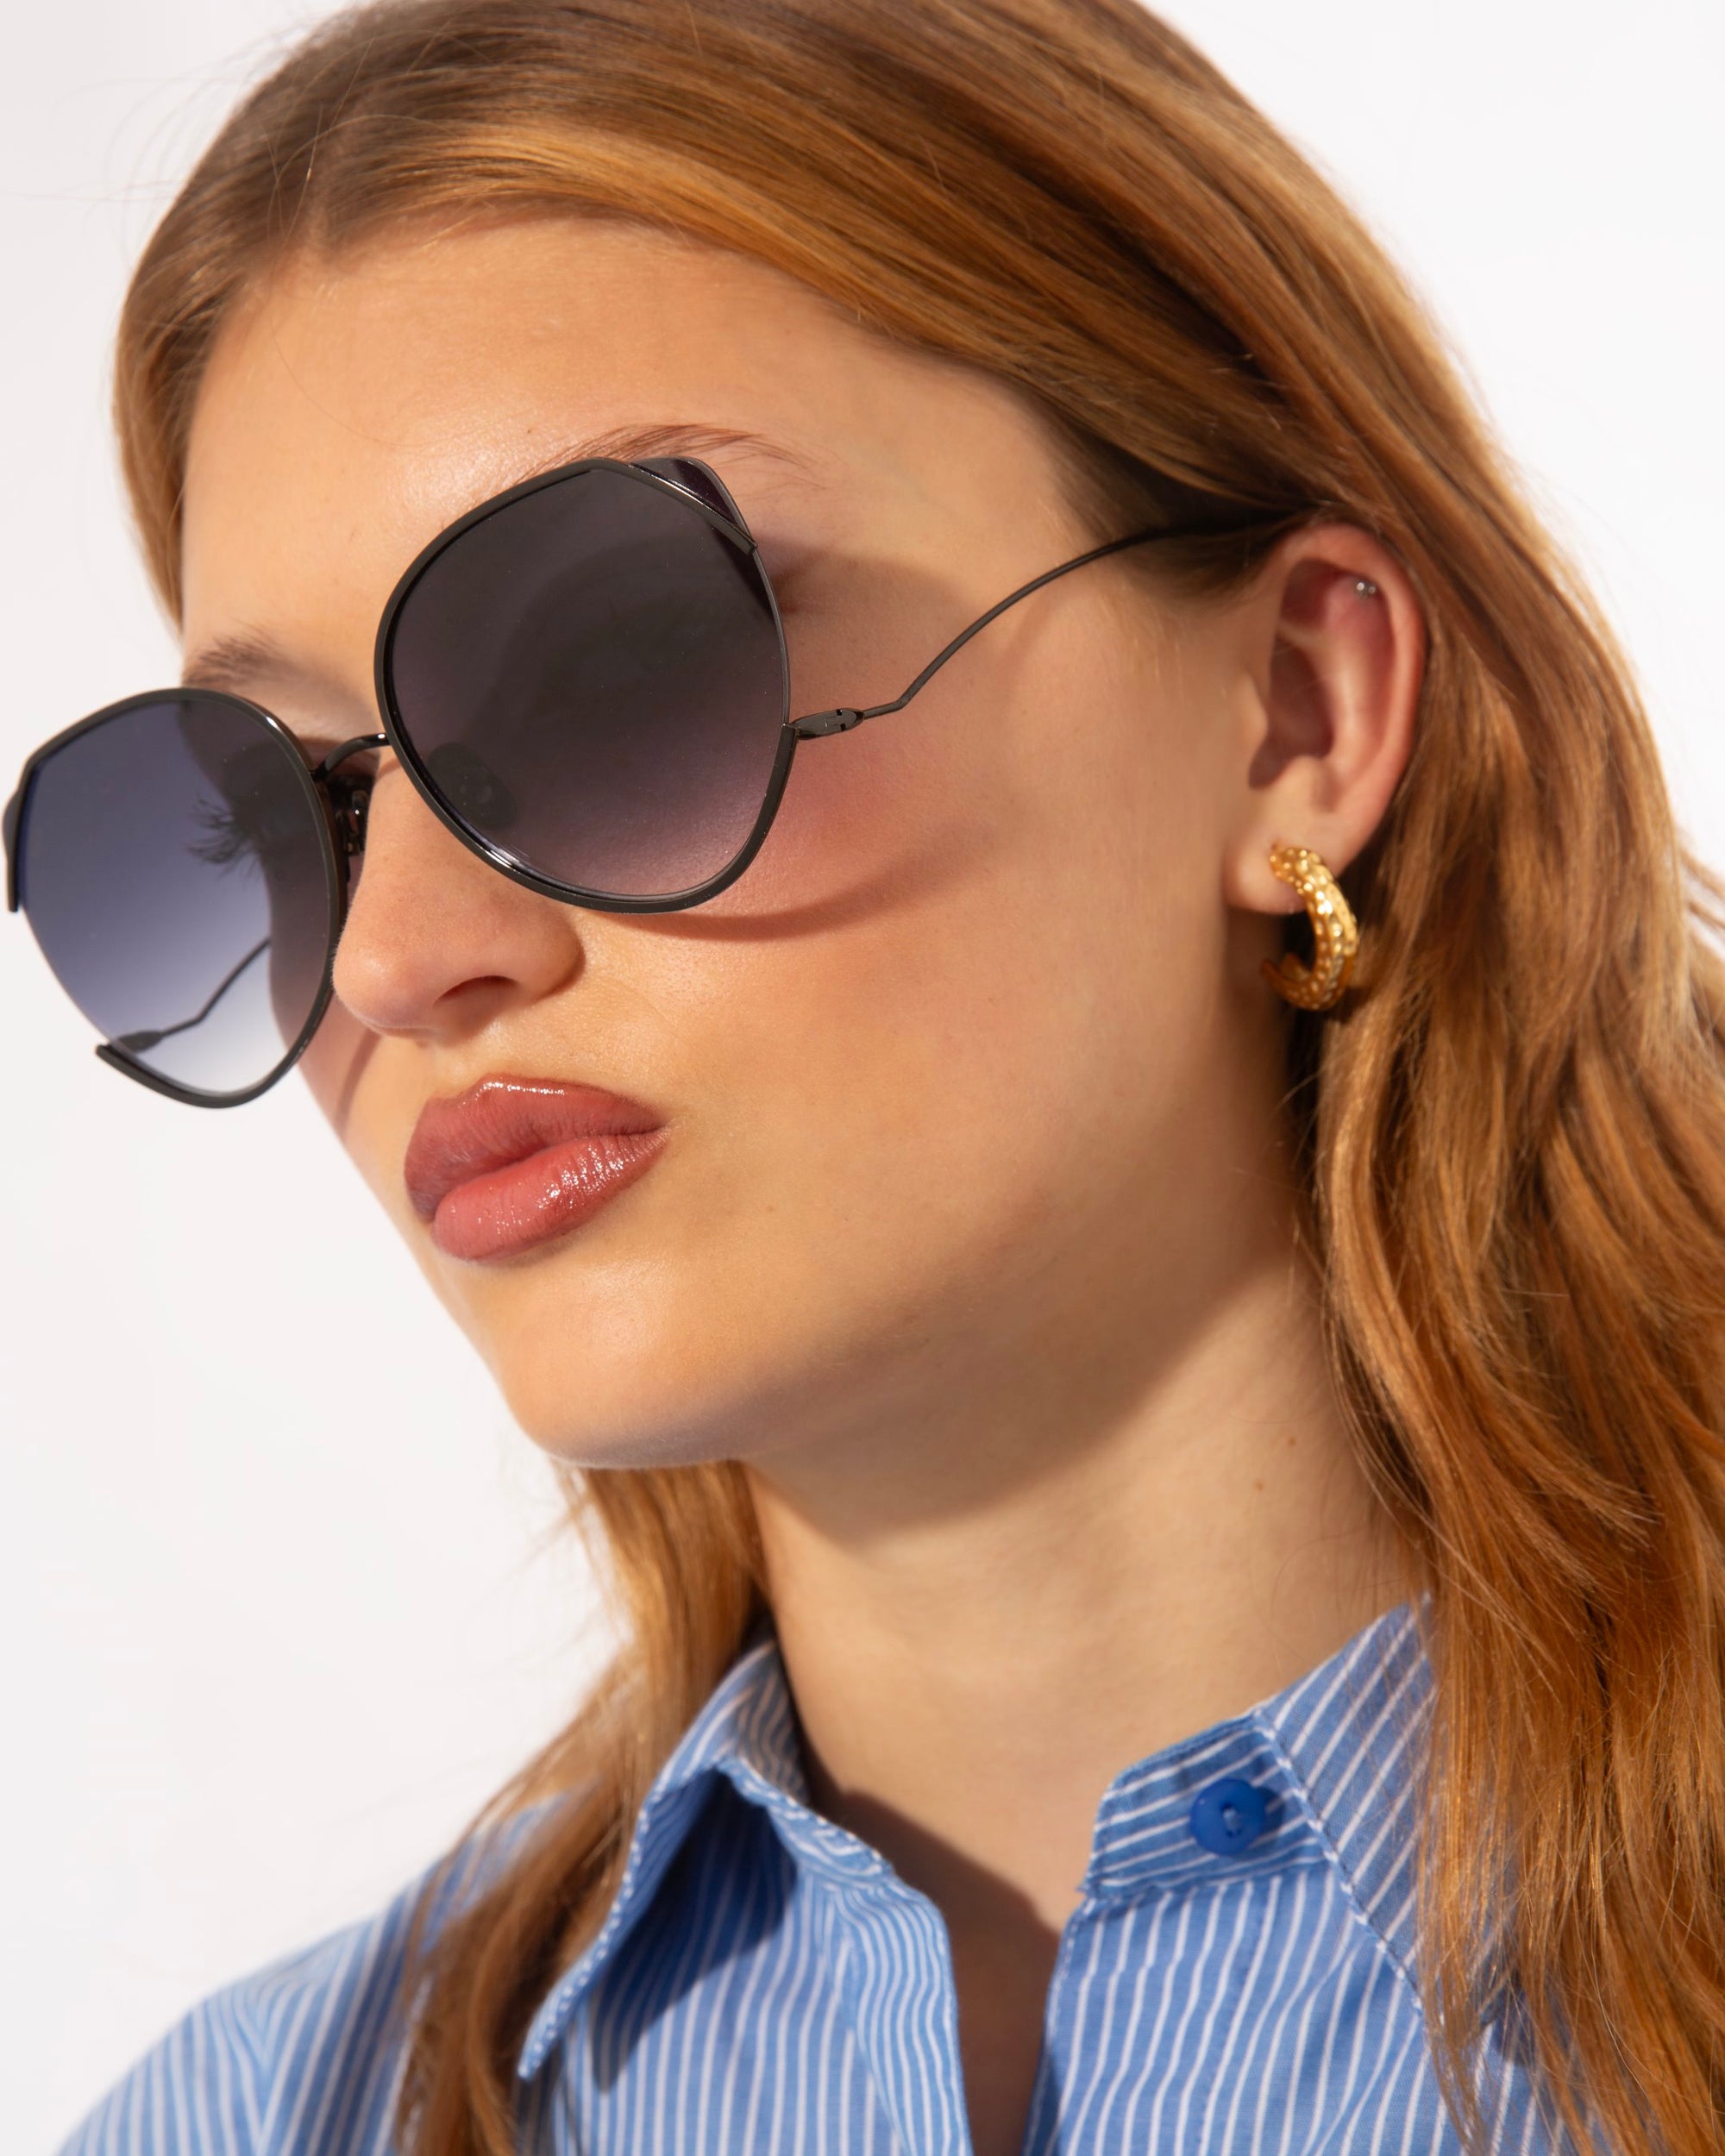 A person with long, light brown hair wears large, round For Art's Sake® Wonderland sunglasses with jadestone nosepads and UV protection. They sport a blue striped shirt with the top button undone and gold hoop earrings, looking to their left against a plain background.